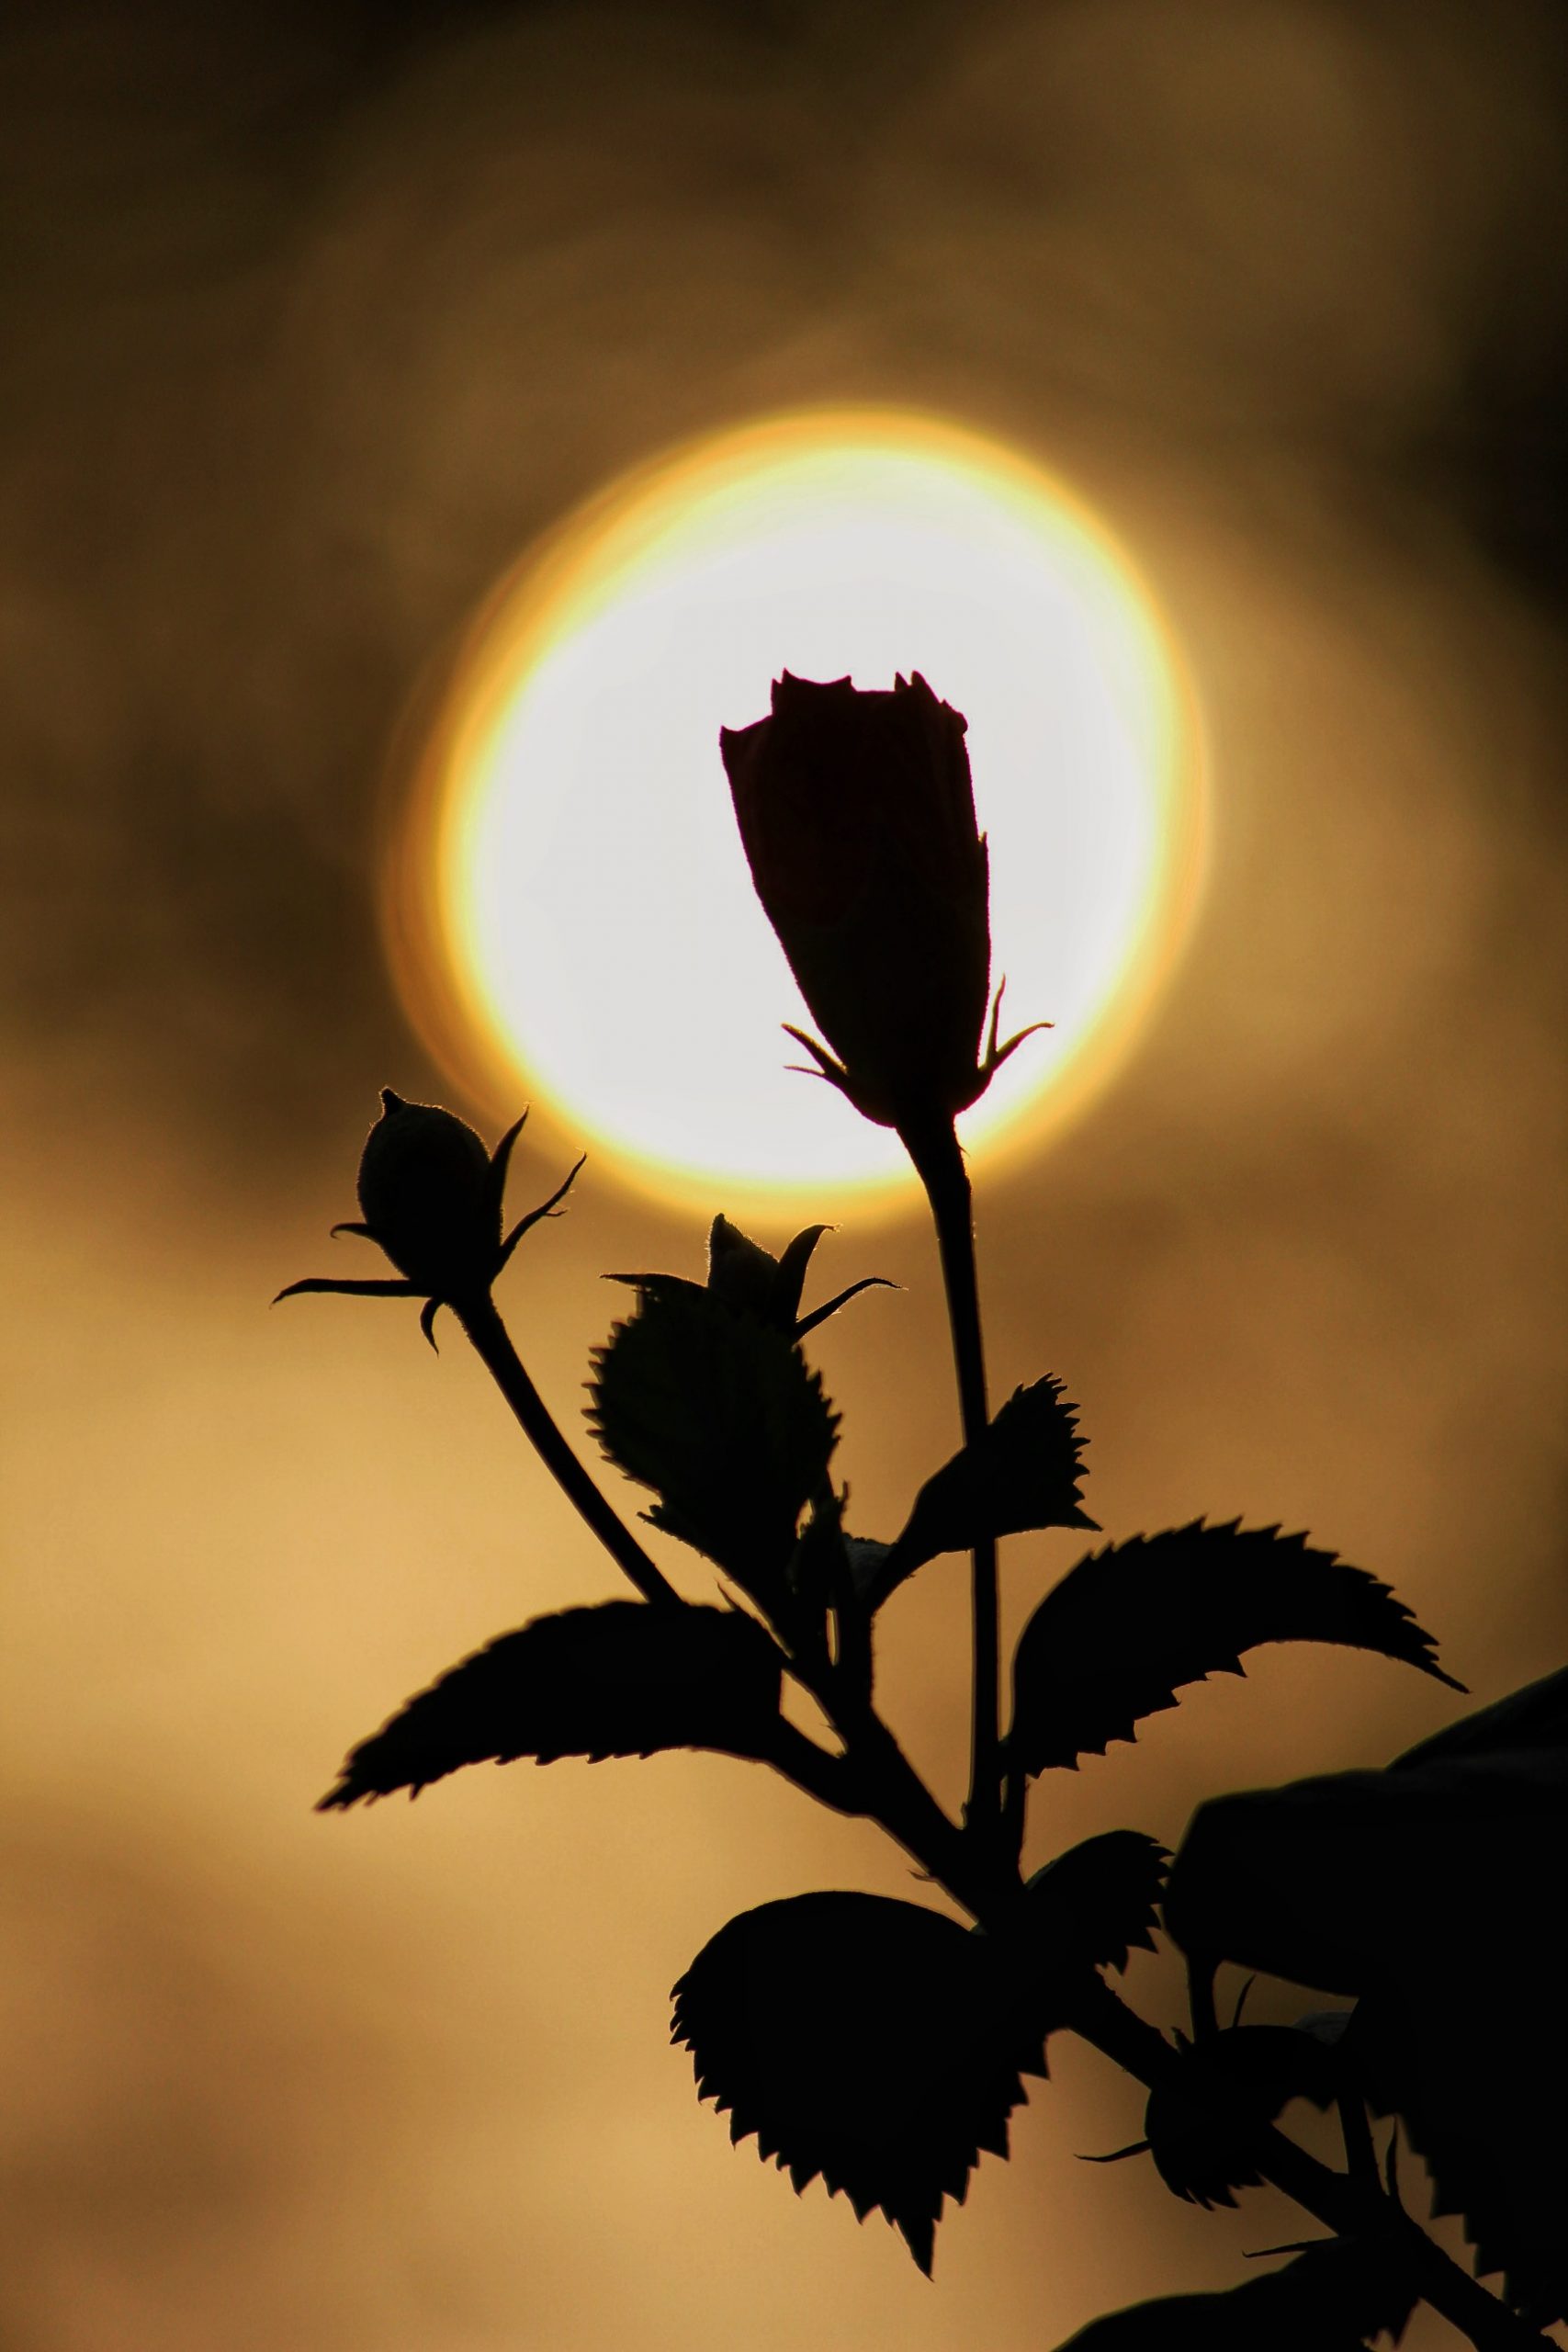 A flower plant during evening